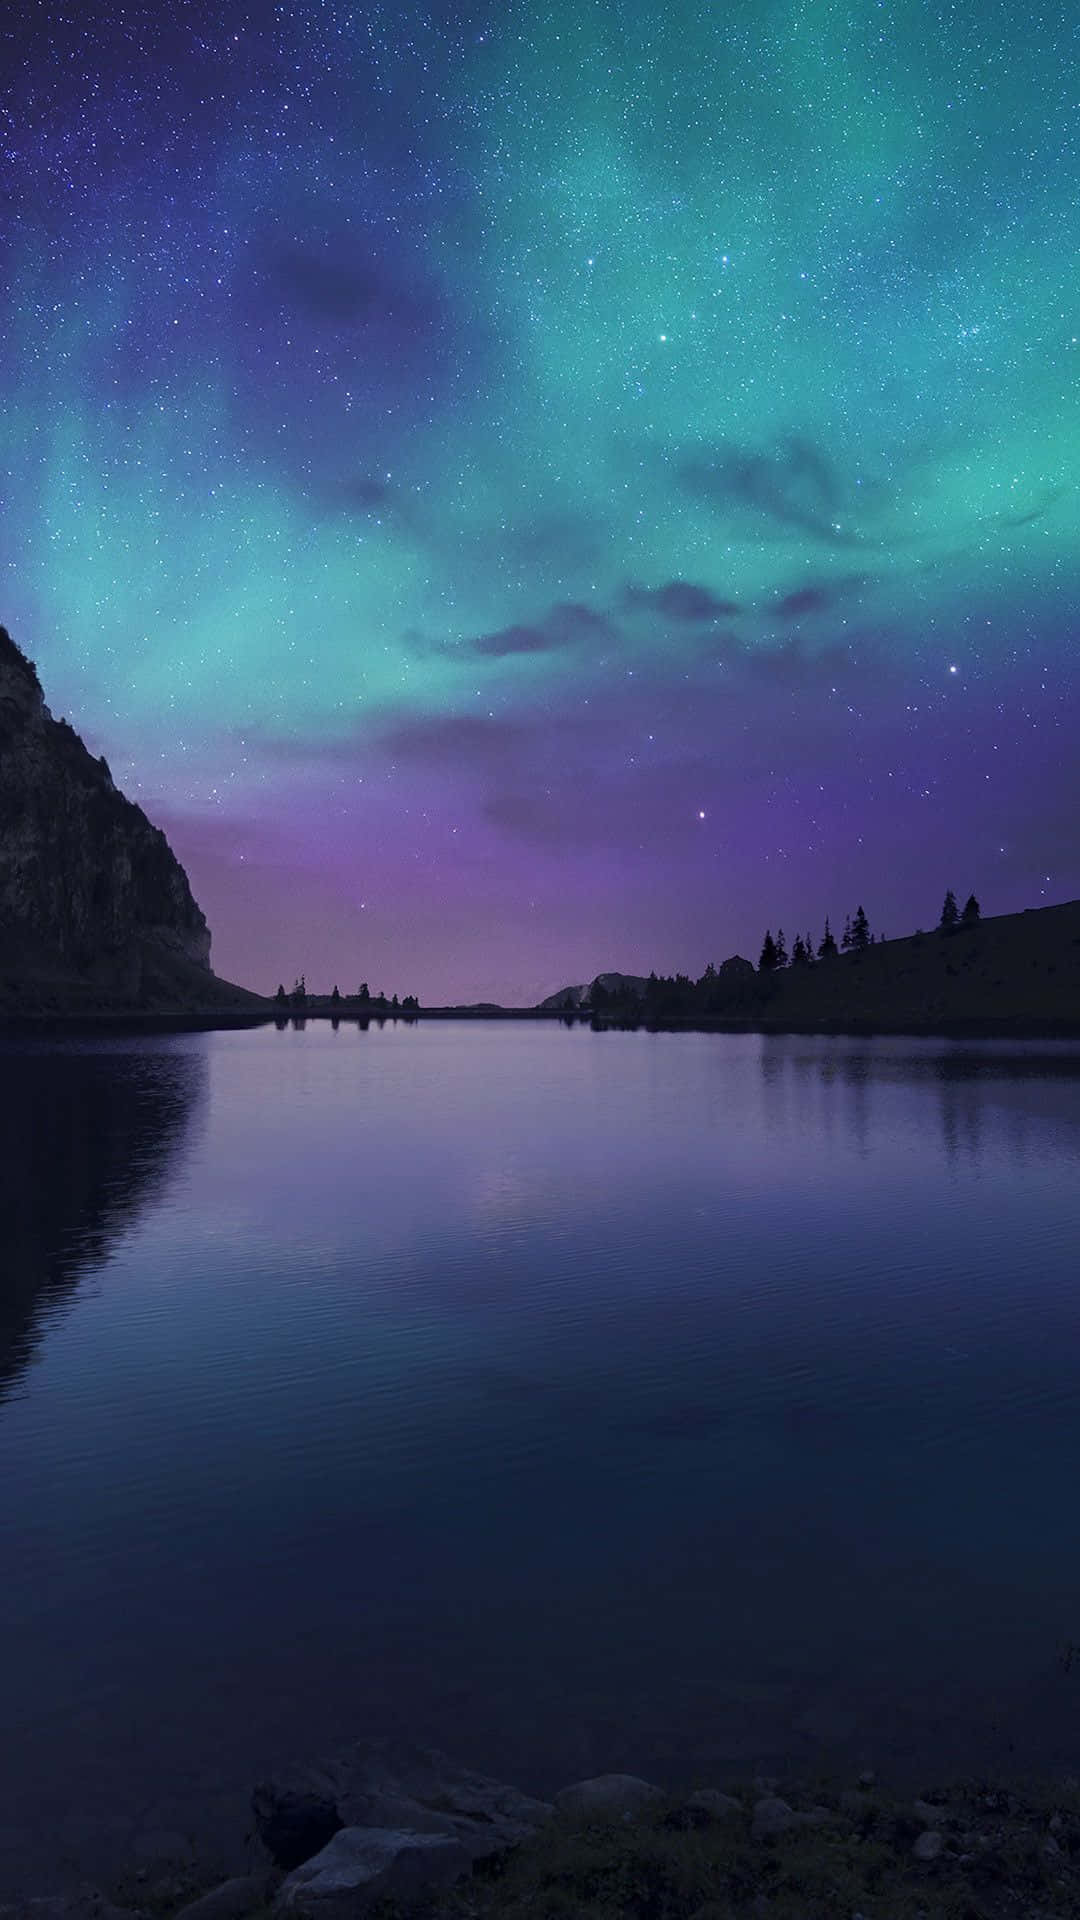 The Aurora Bore Over A Lake With Mountains In The Background Wallpaper